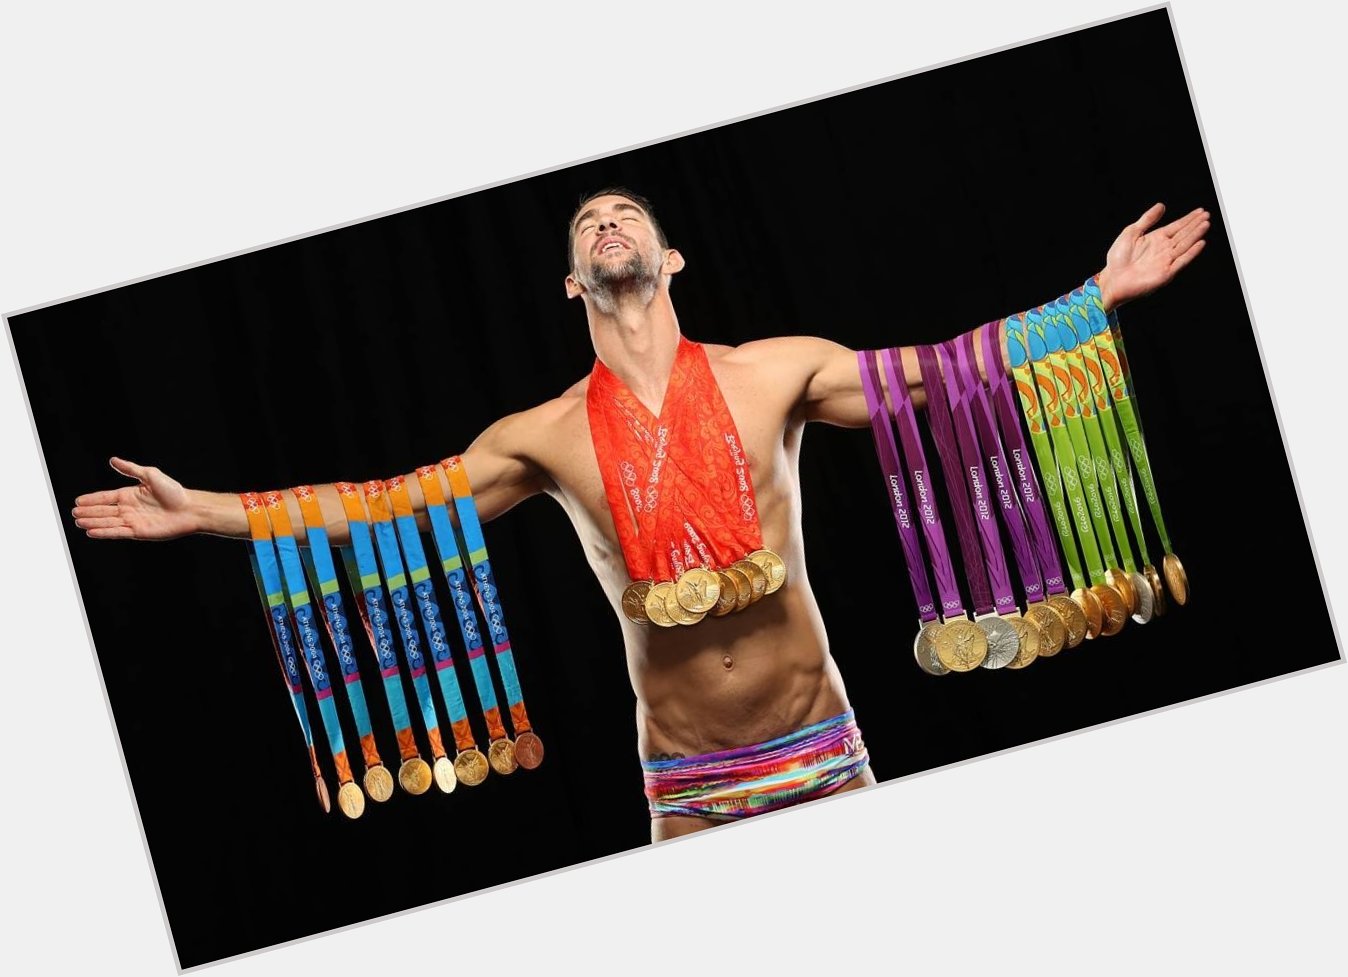 Happy birthday goat michael phelps  in Olympic total 28 medals only player to have 23 gold\s in individual event 